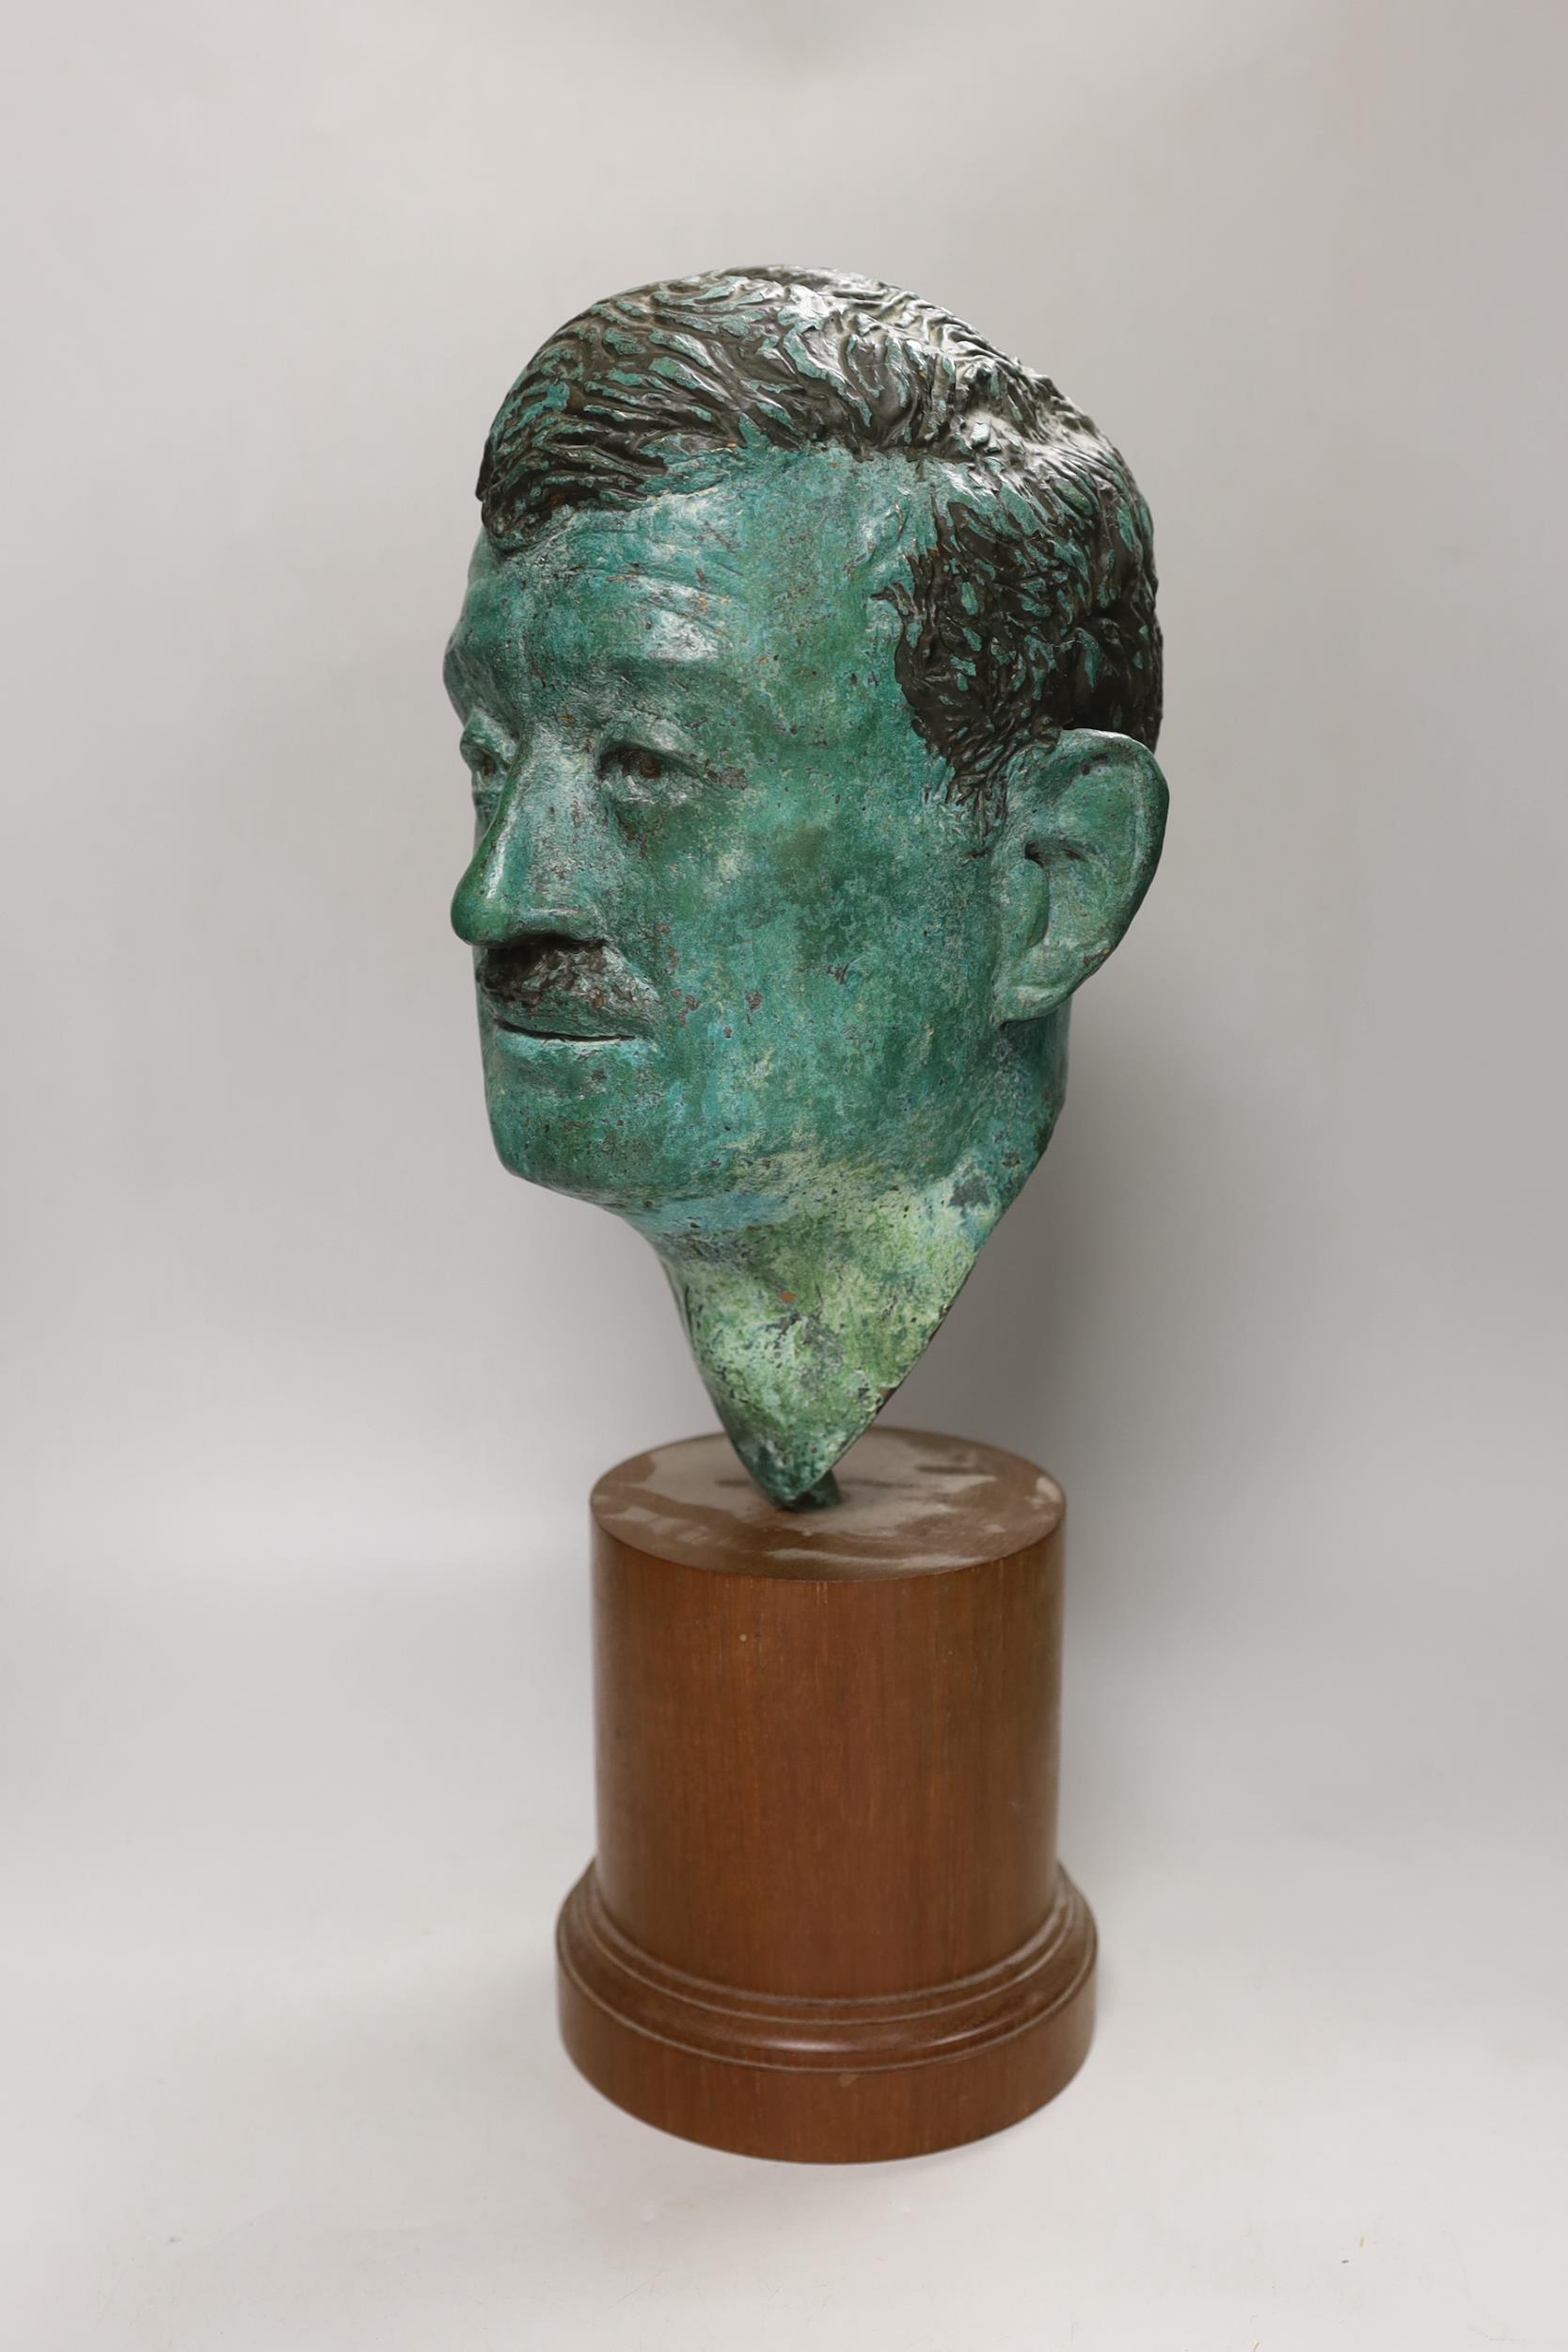 A verdigris metal head of a gentleman mounted on a wooden stand, 48cm high - Image 2 of 3